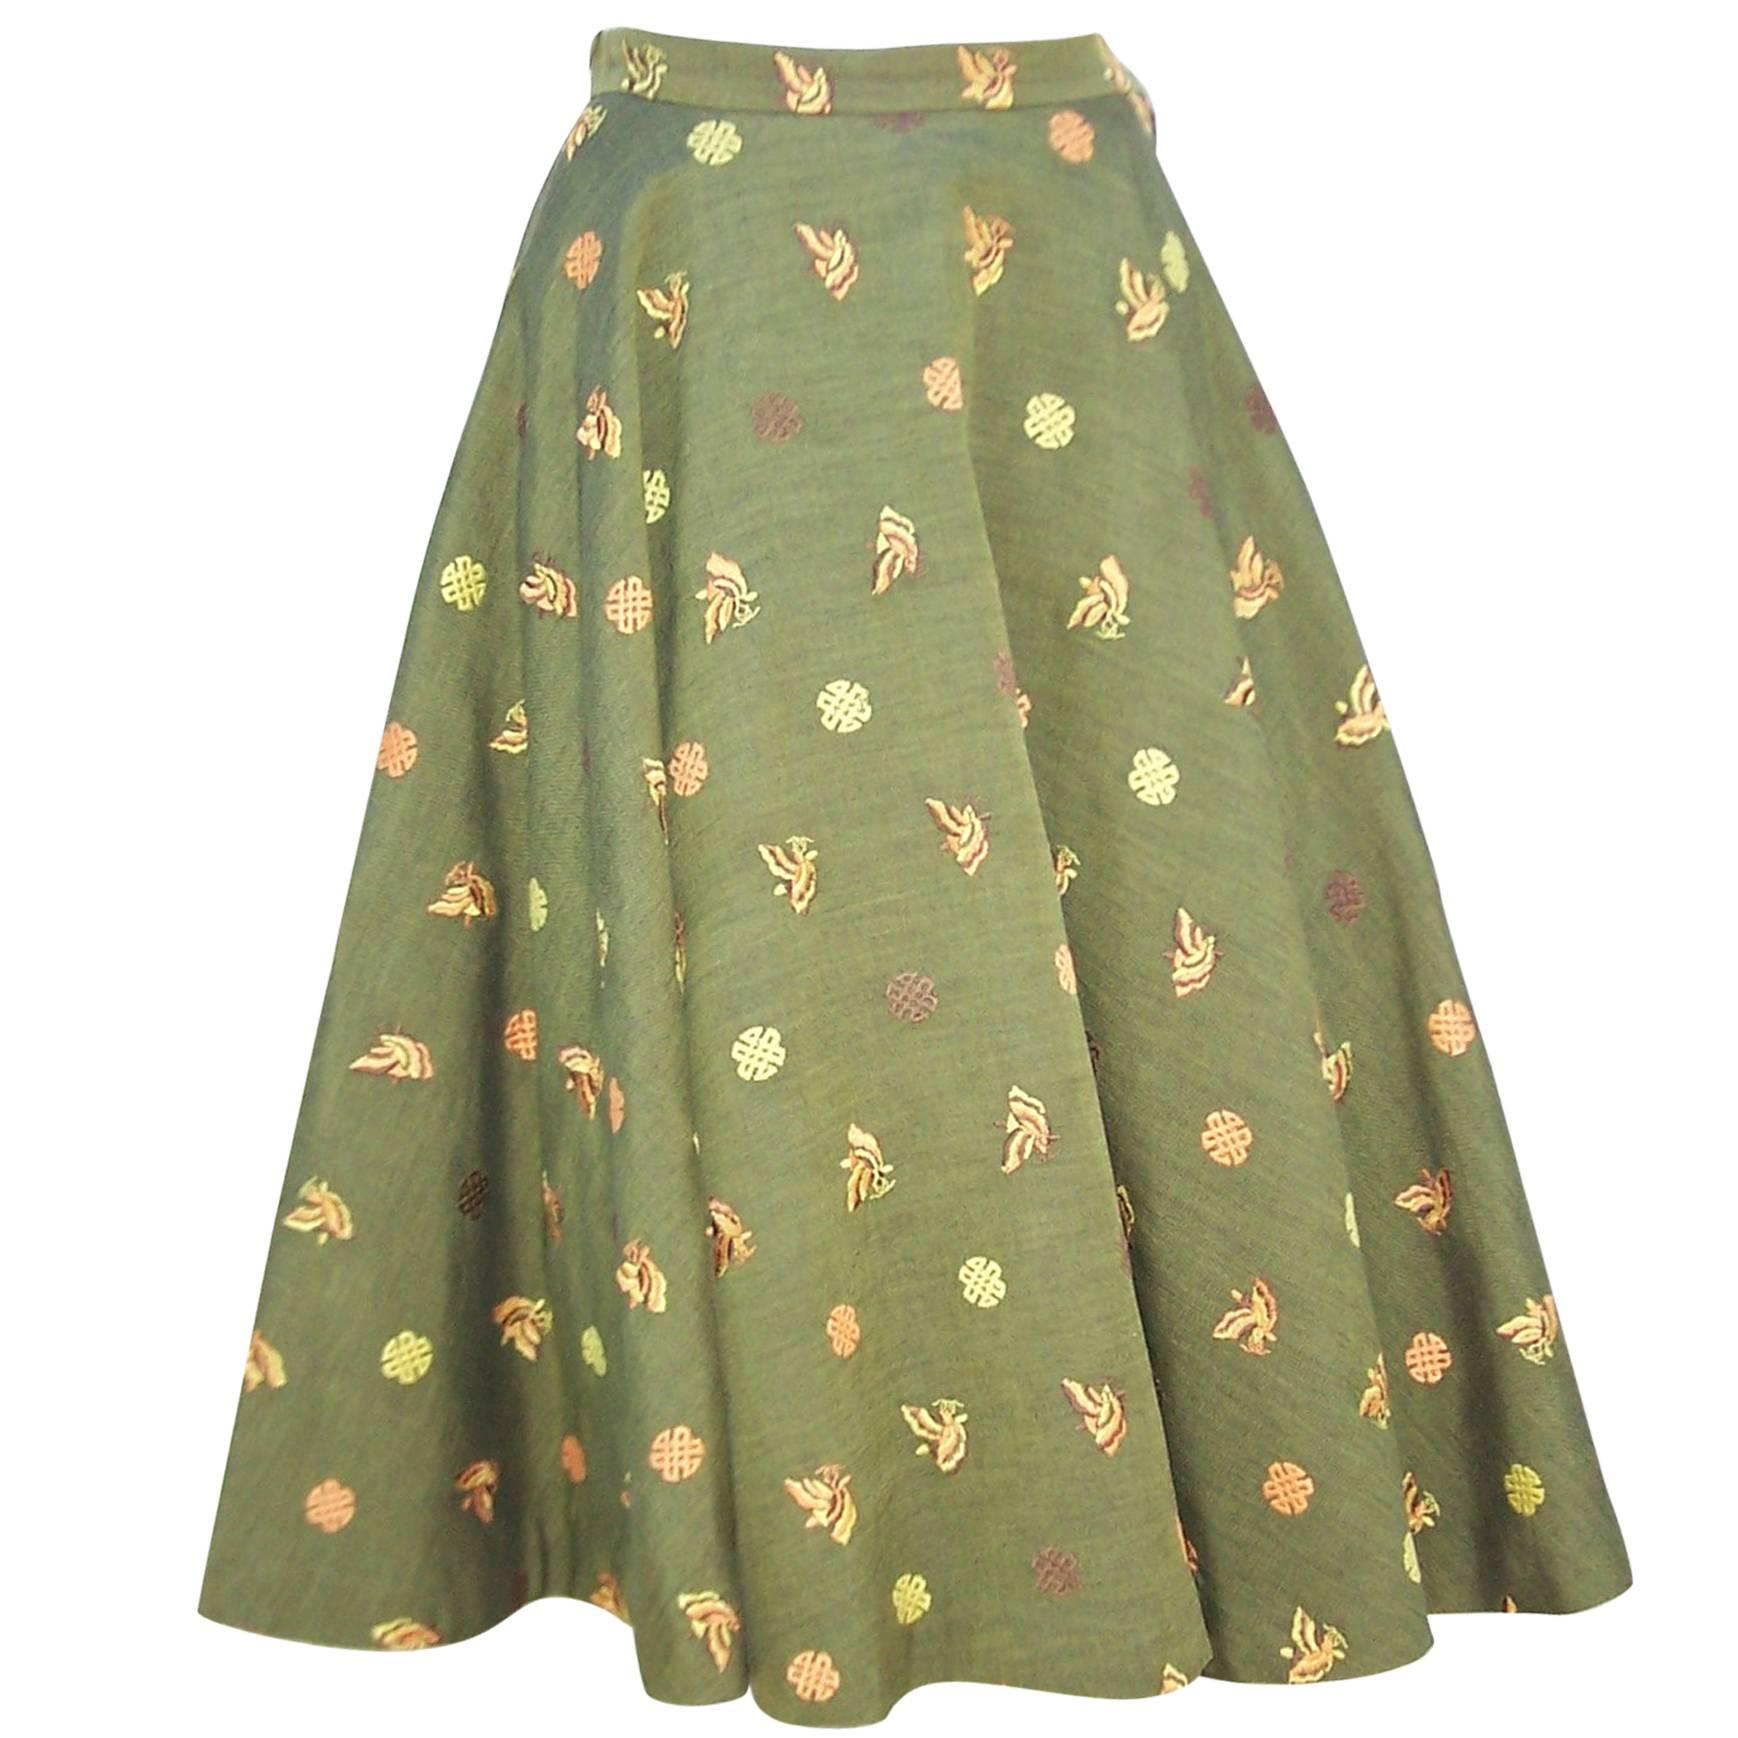 1950's Asian Inspired Full Circle Skirt With Embroidered Butterflies 